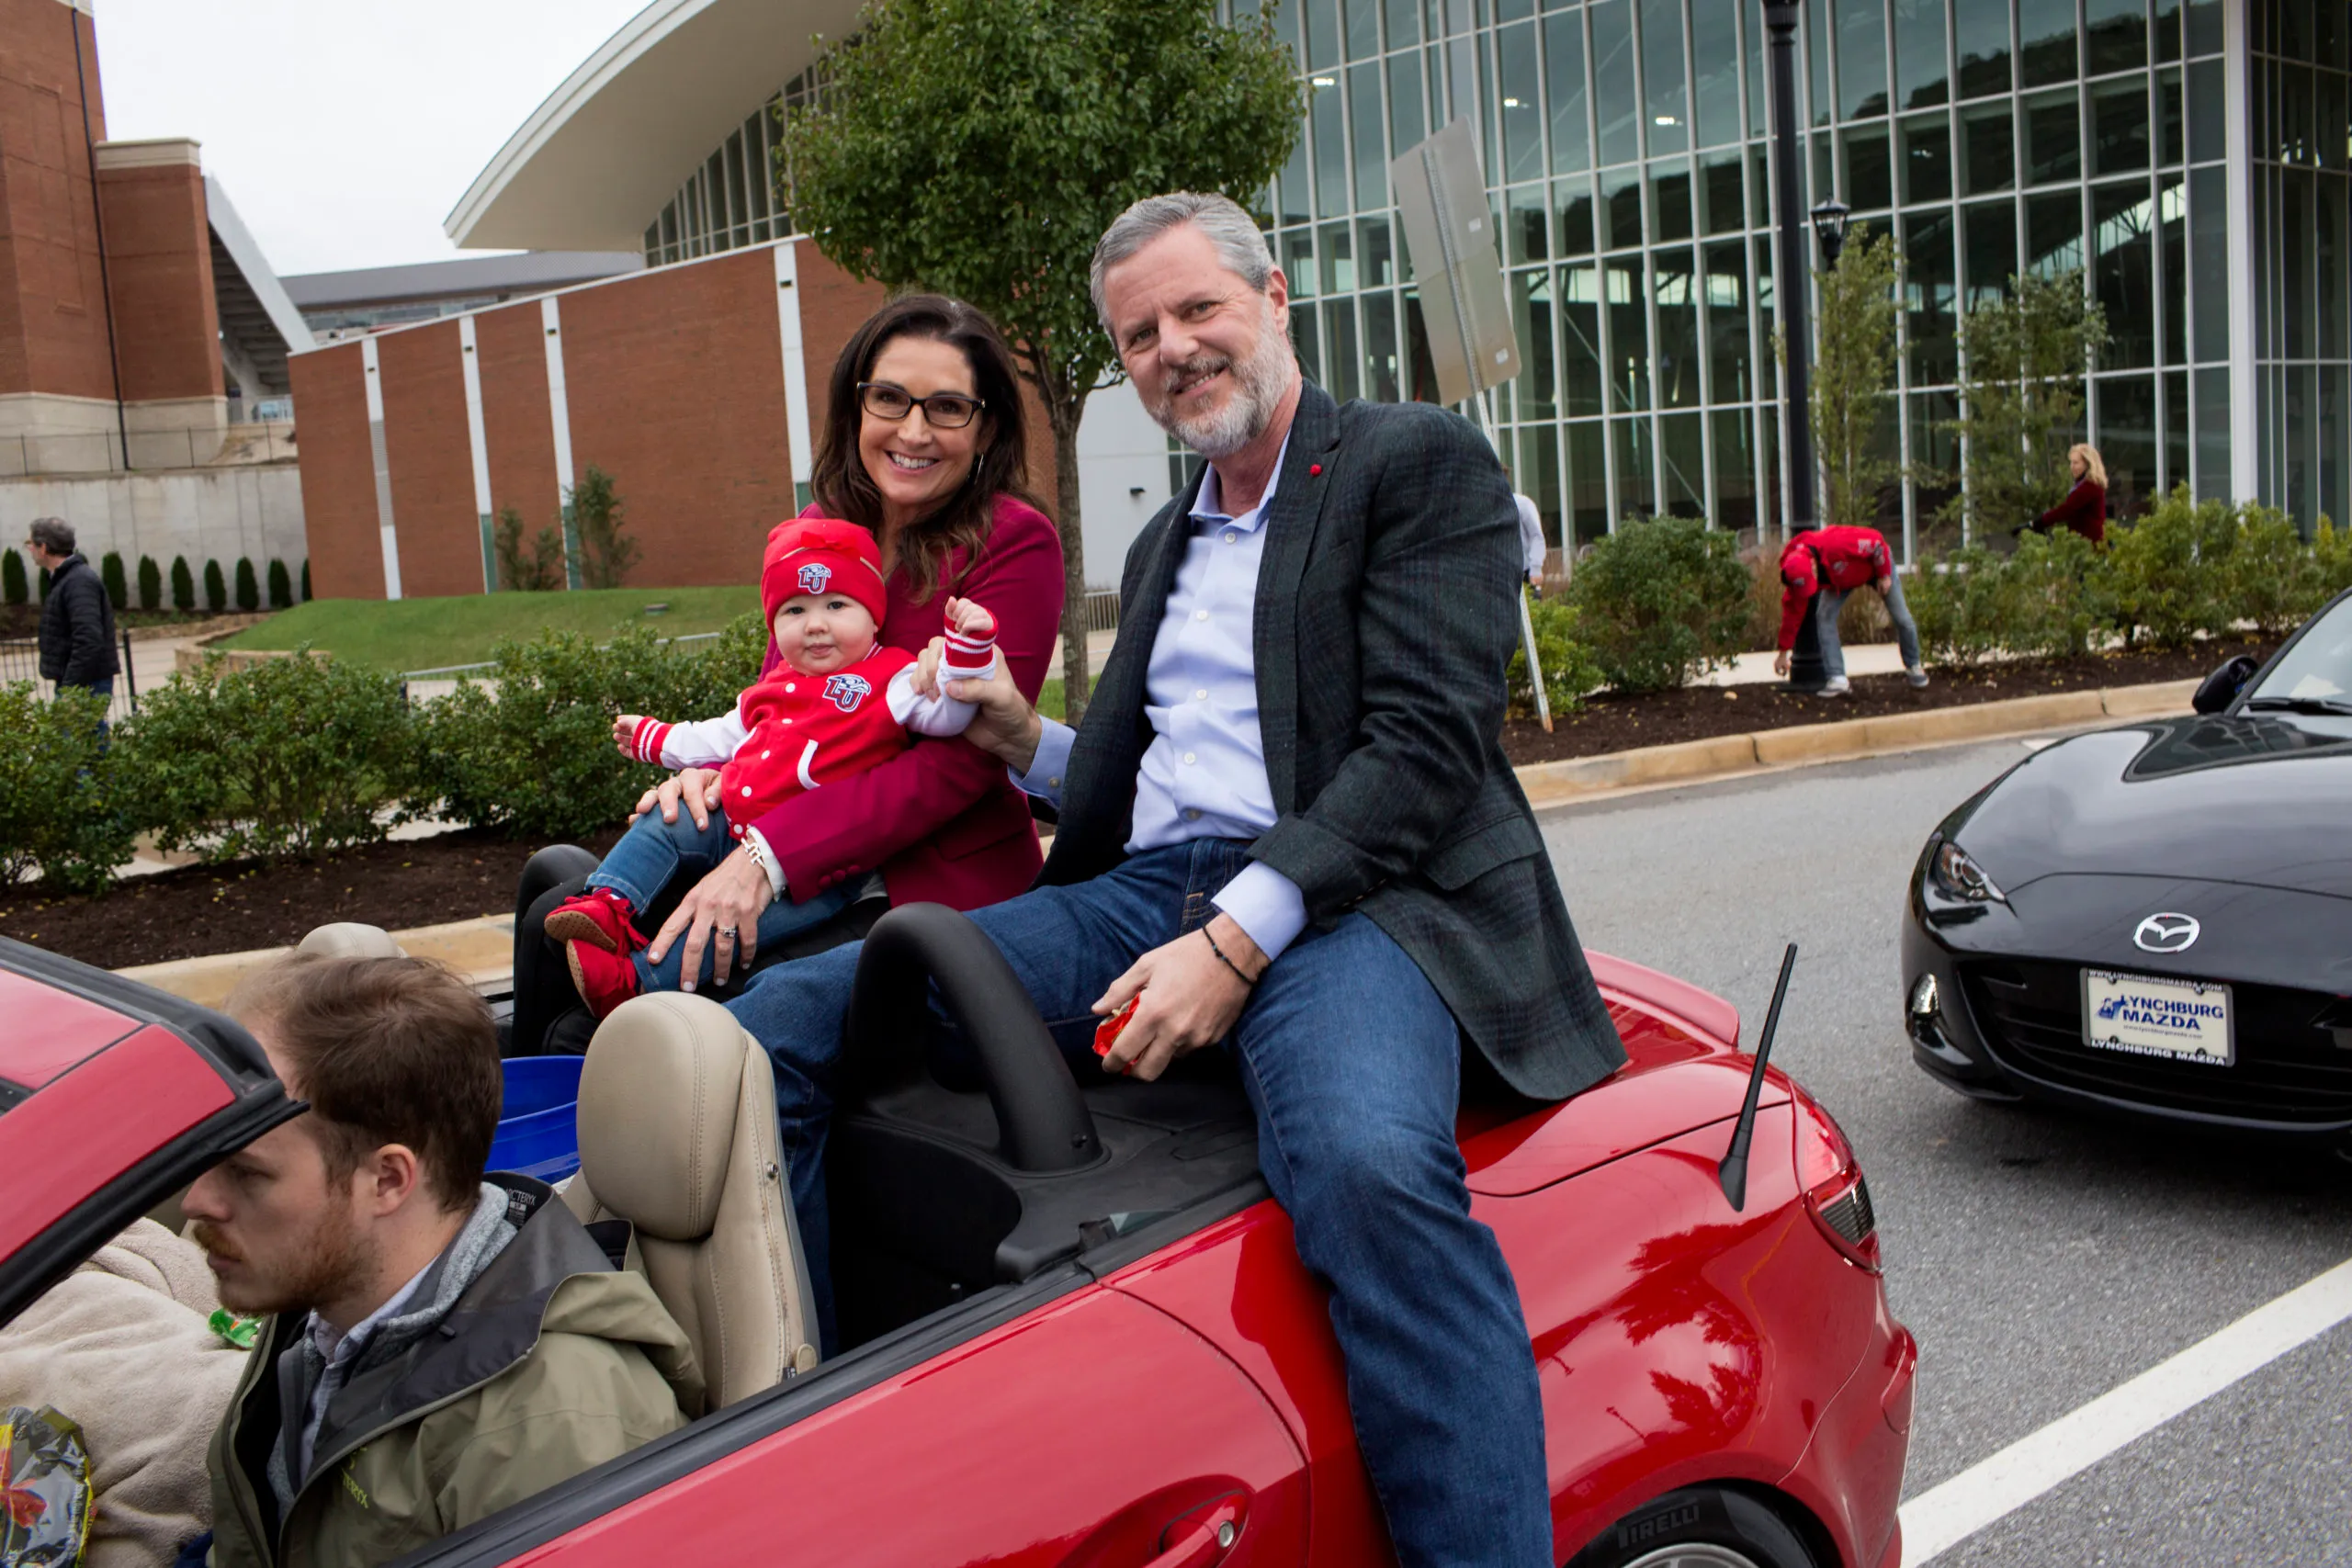 Then-President of Liberty University Jerry Falwell Jr. rides with his wife Becki and a grandchild in the school's annual homecoming weekend parade on October 20, 2018 in Lynchburg, Virginia. 